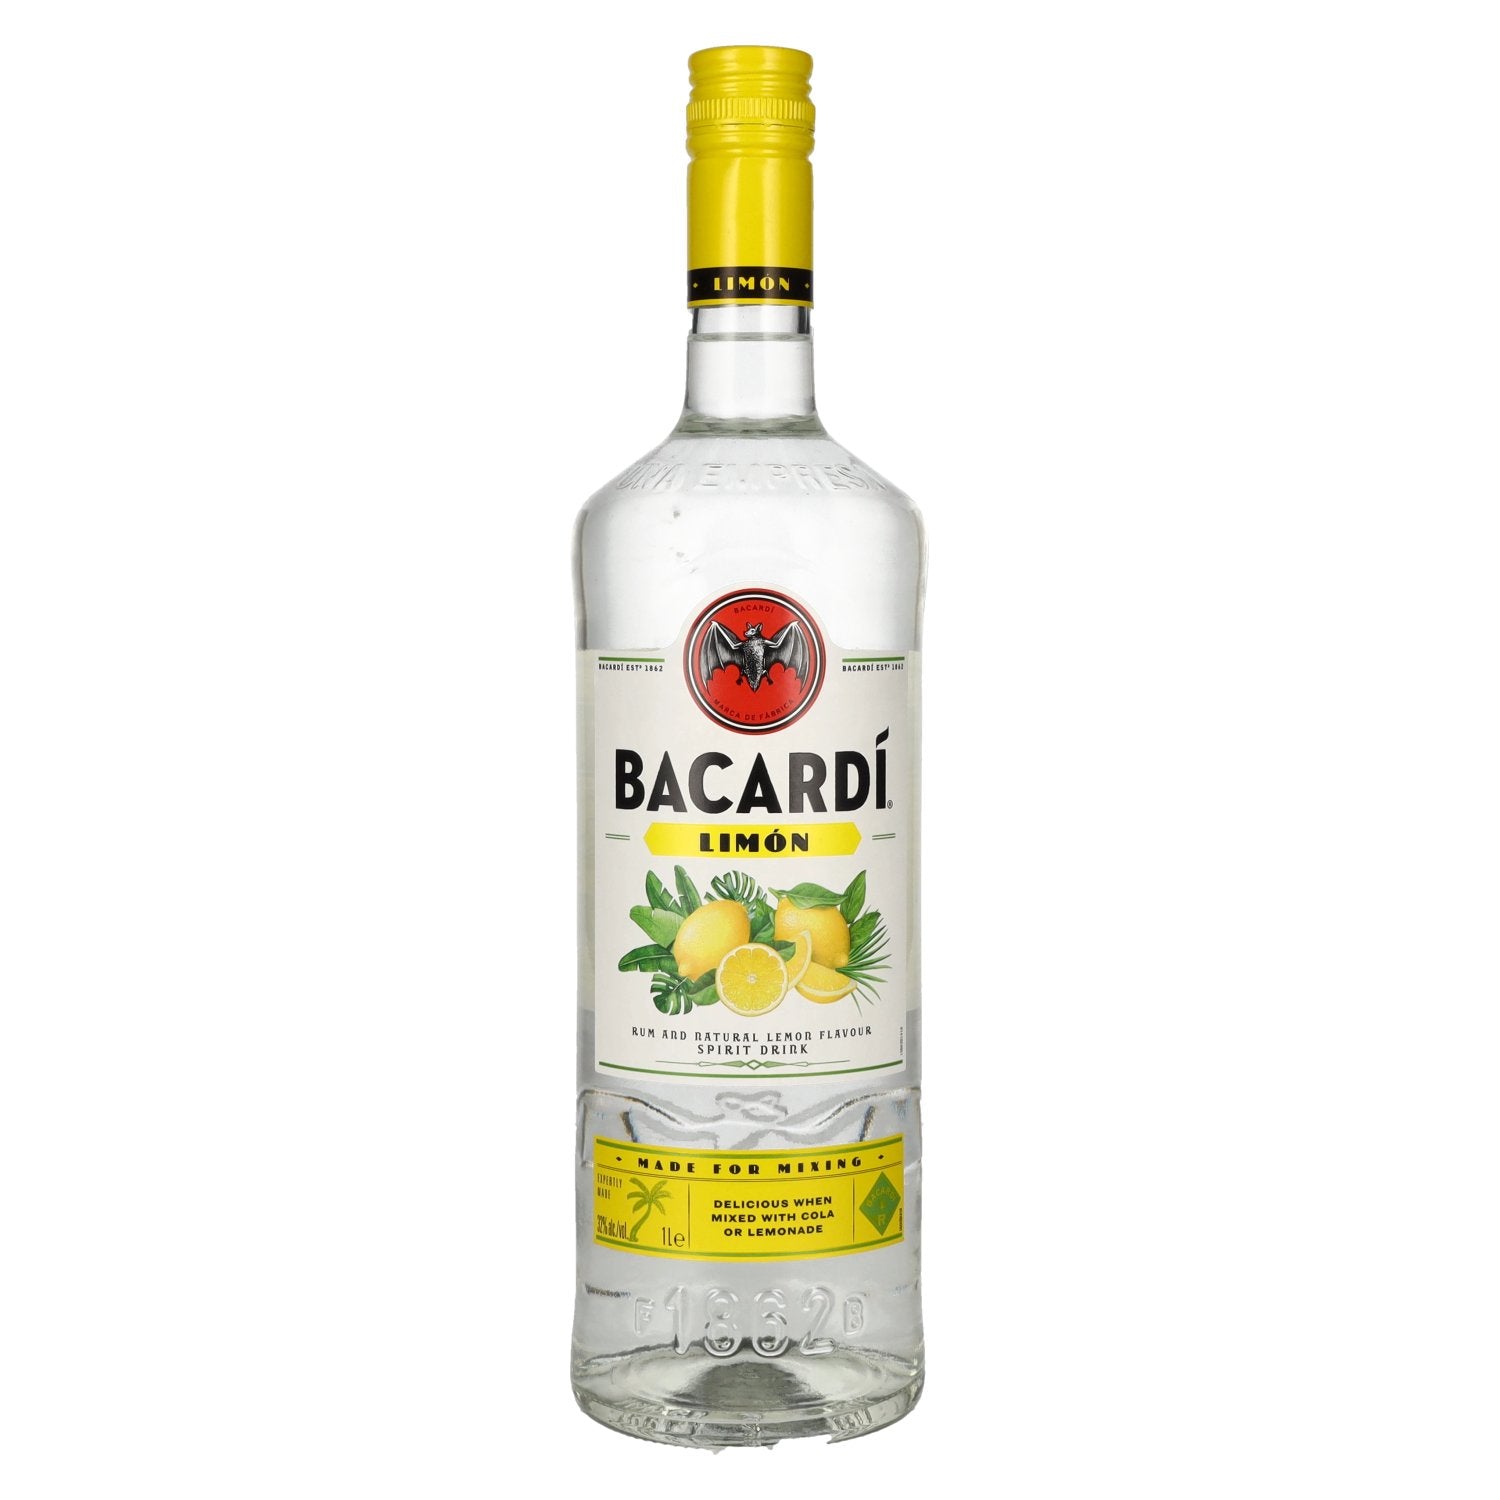 Bacardi LIMON Rum With Natural Flavors 32% Vol. 1l